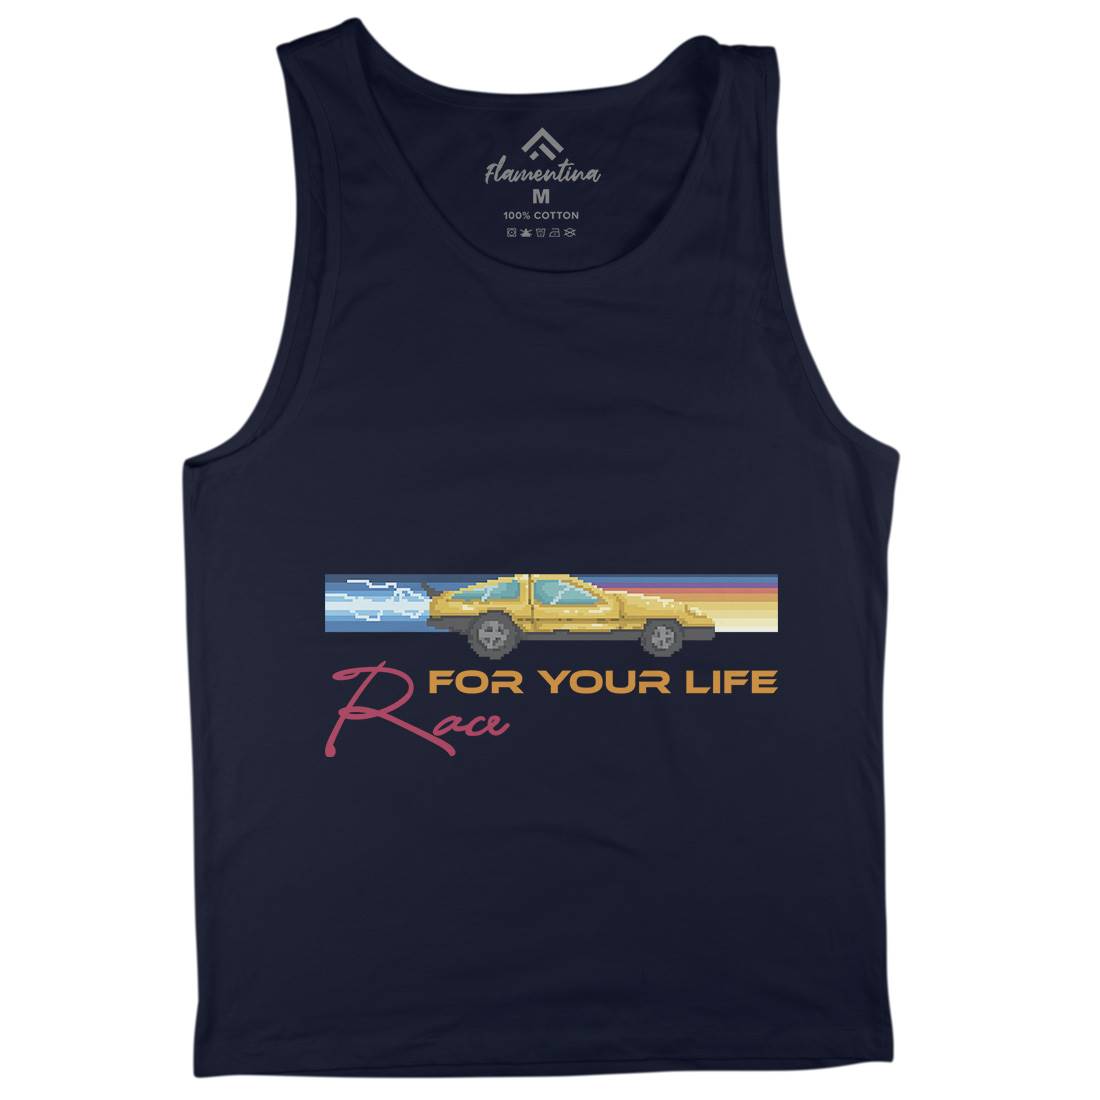 Race For Your Life Mens Tank Top Vest Cars B951